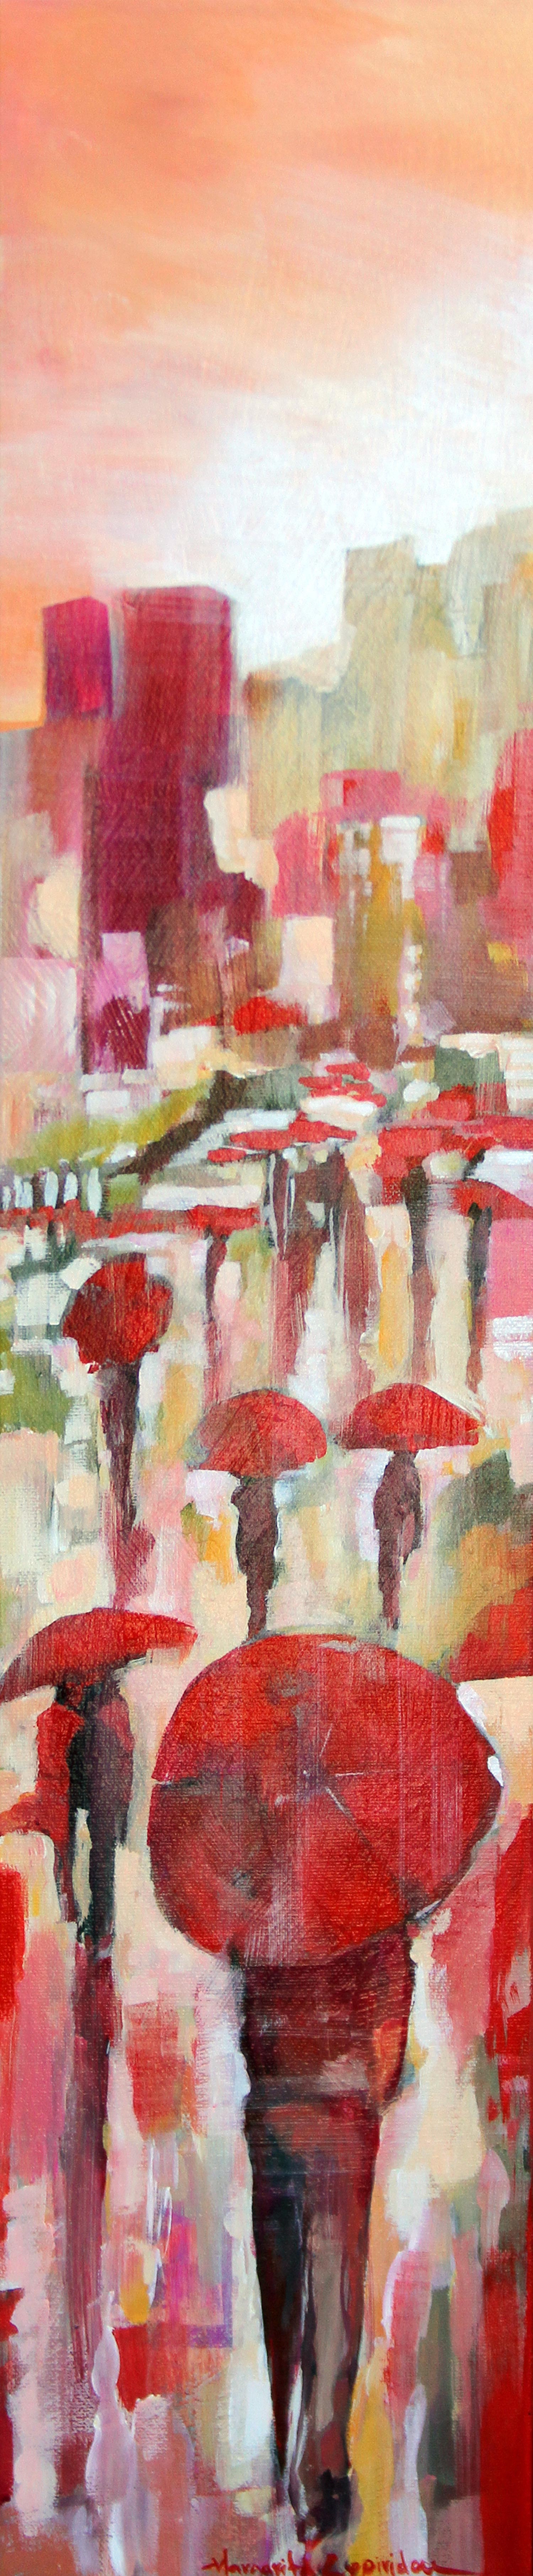 After The Red Umbrella  -  SOLD